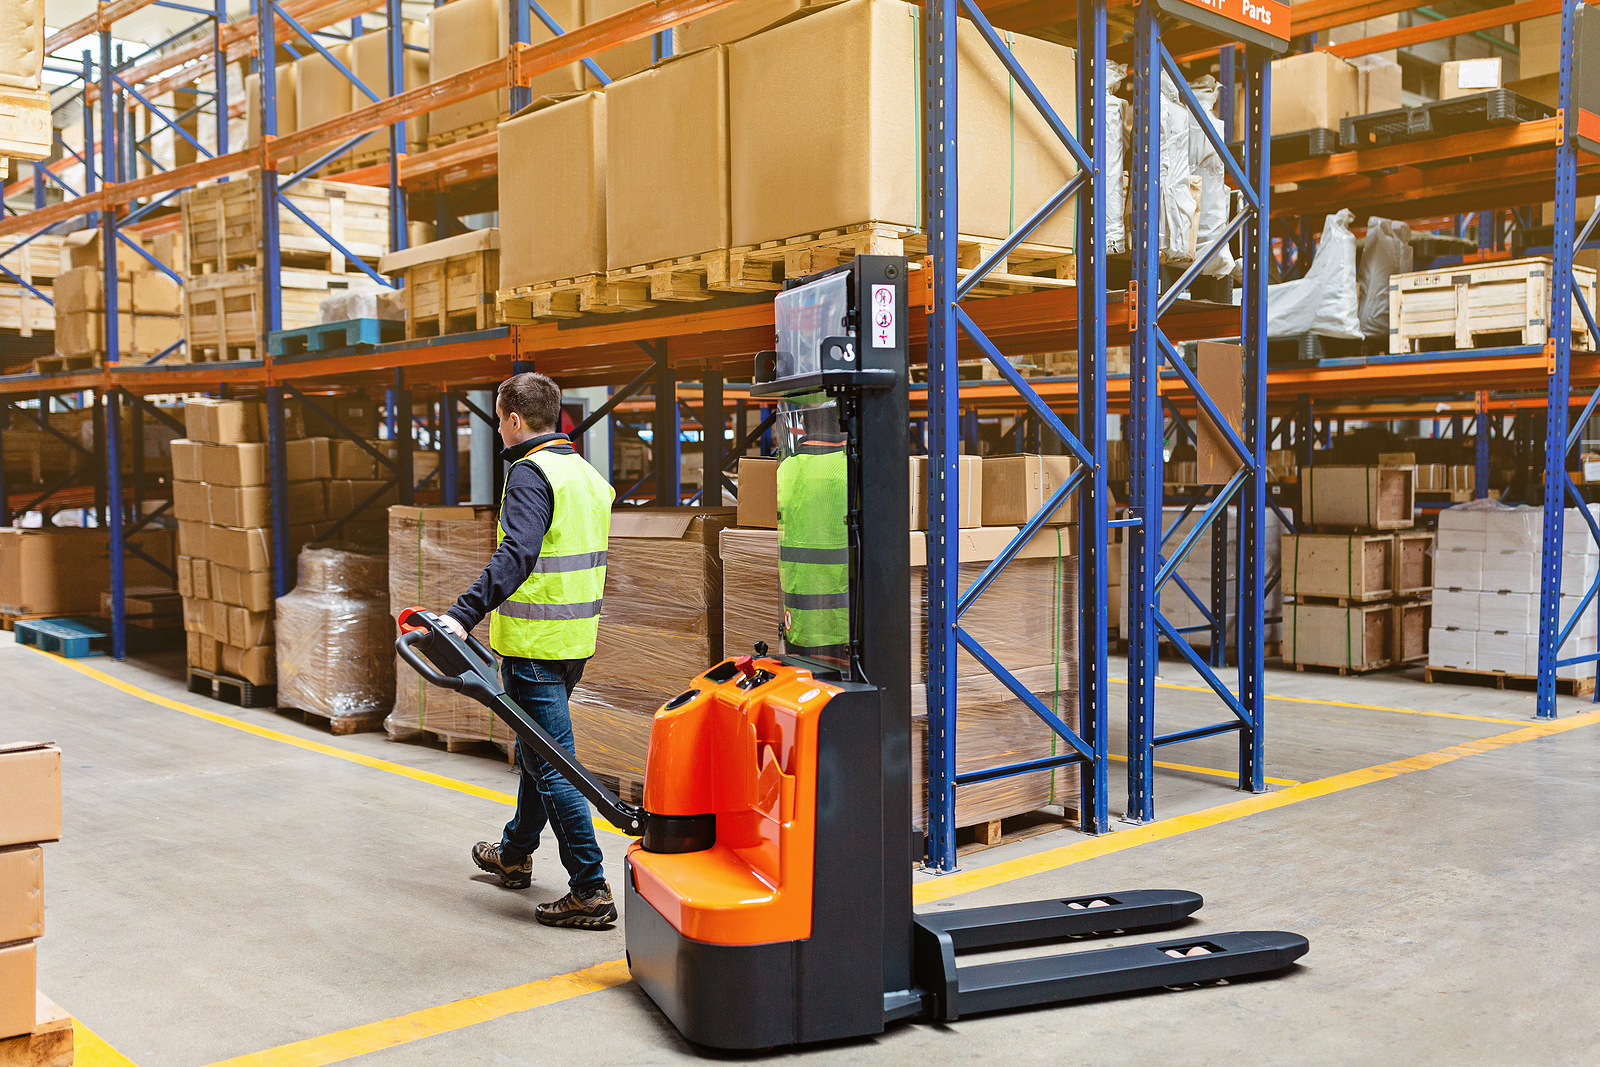 3 Reasons Why You Should Hire Temporary Workers for Your Distribution Center